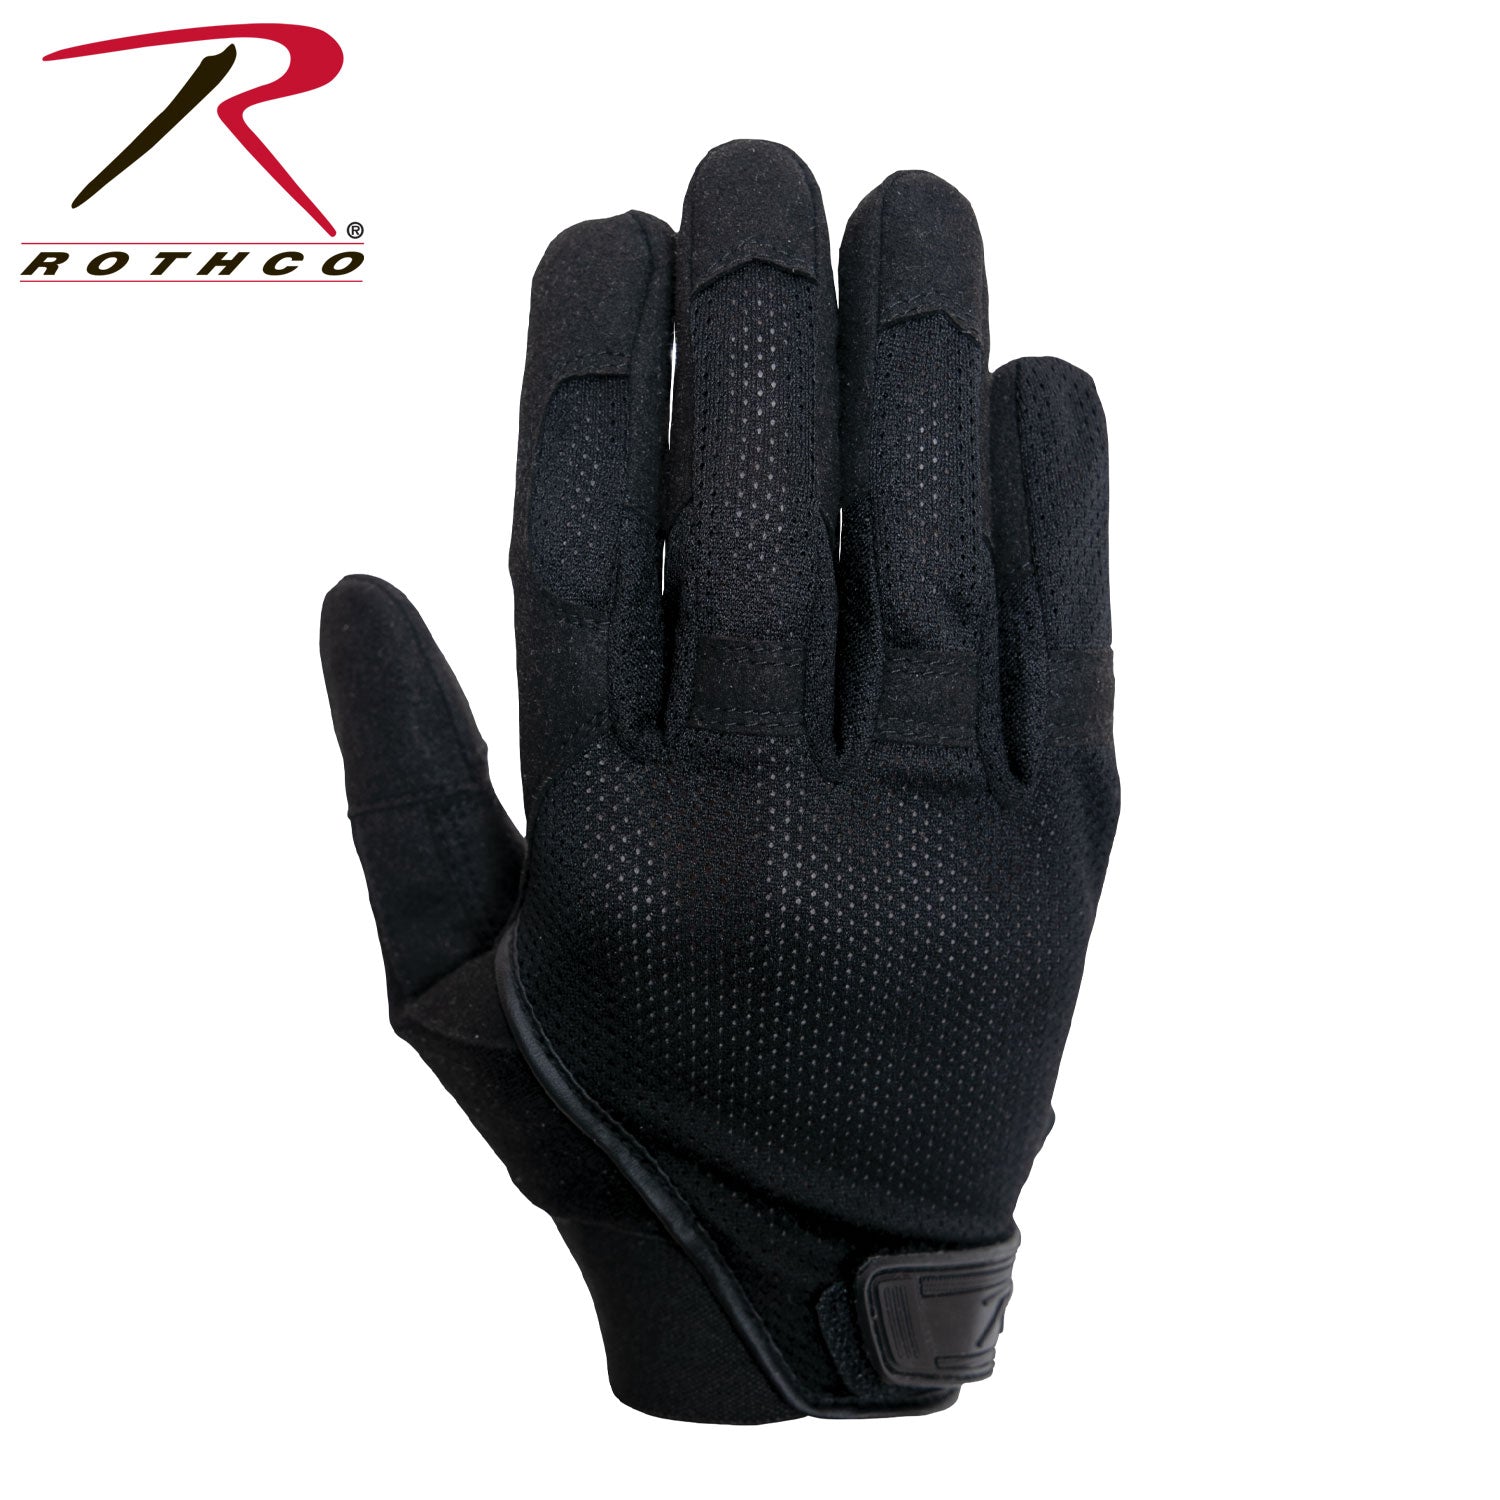 Rothco Lightweight Mesh Tactical Glove